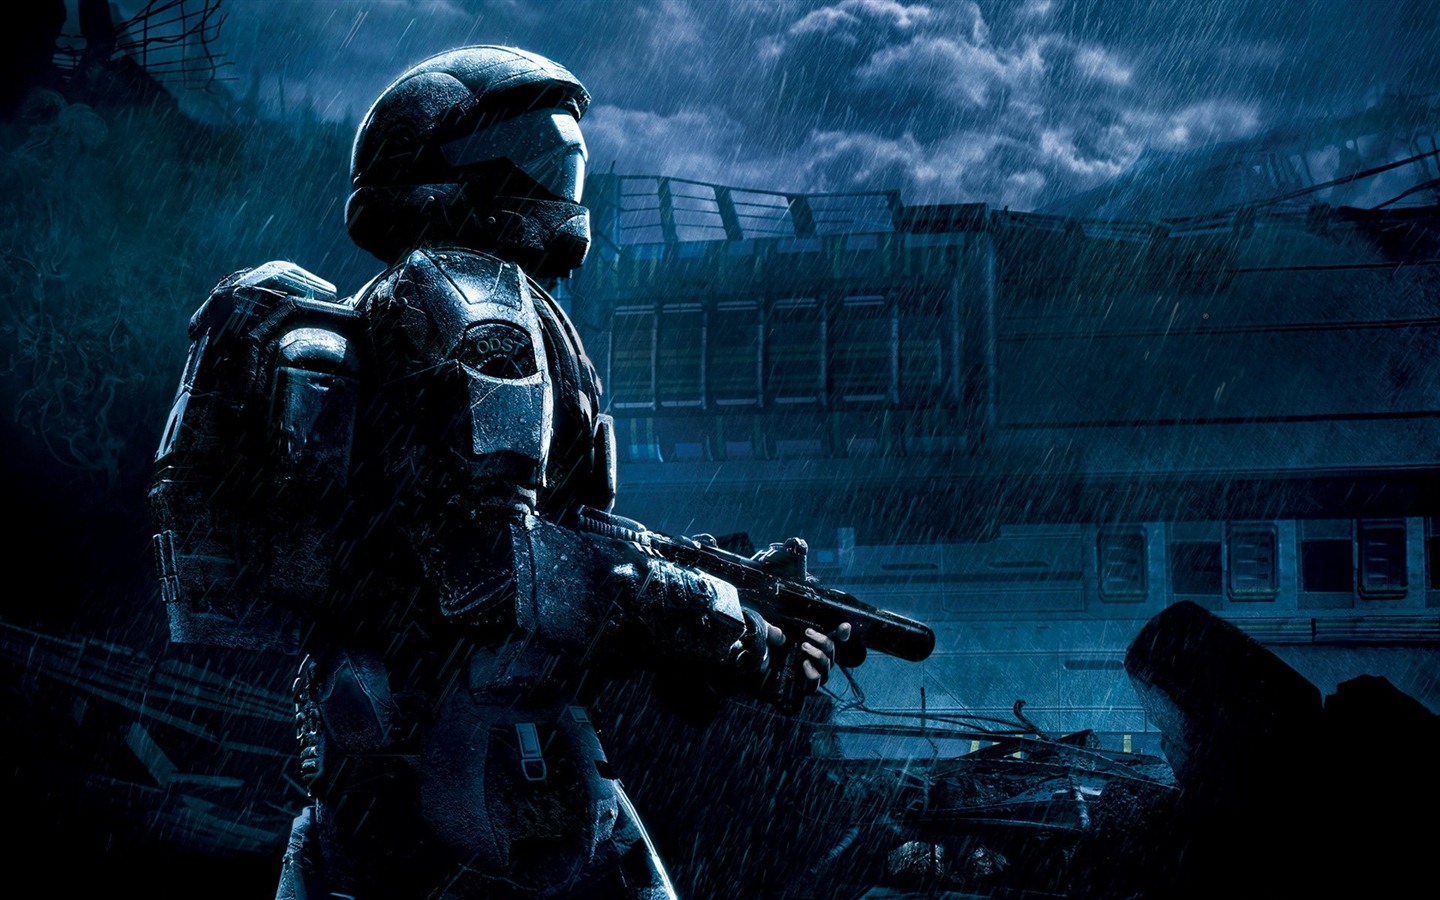 Halo game HD wallpapers #5 - 1440x900